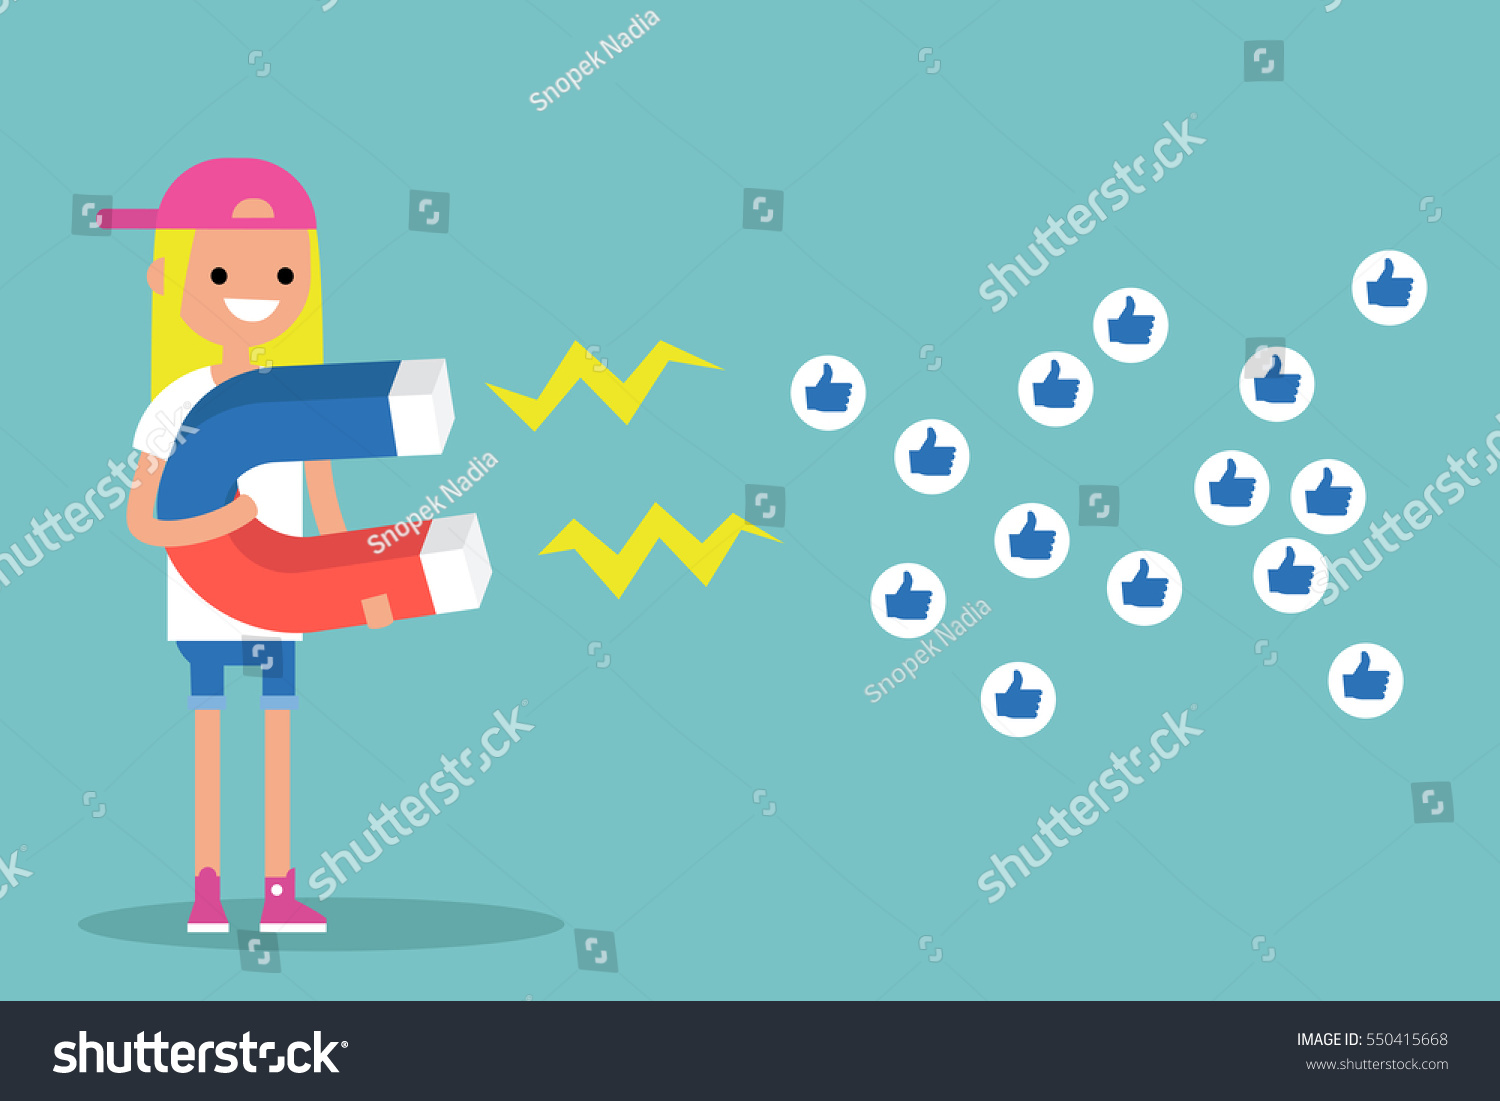 Social media marketing concept. Young blonde girl attracting likes with a huge magnet / editable flat vector illustration #550415668